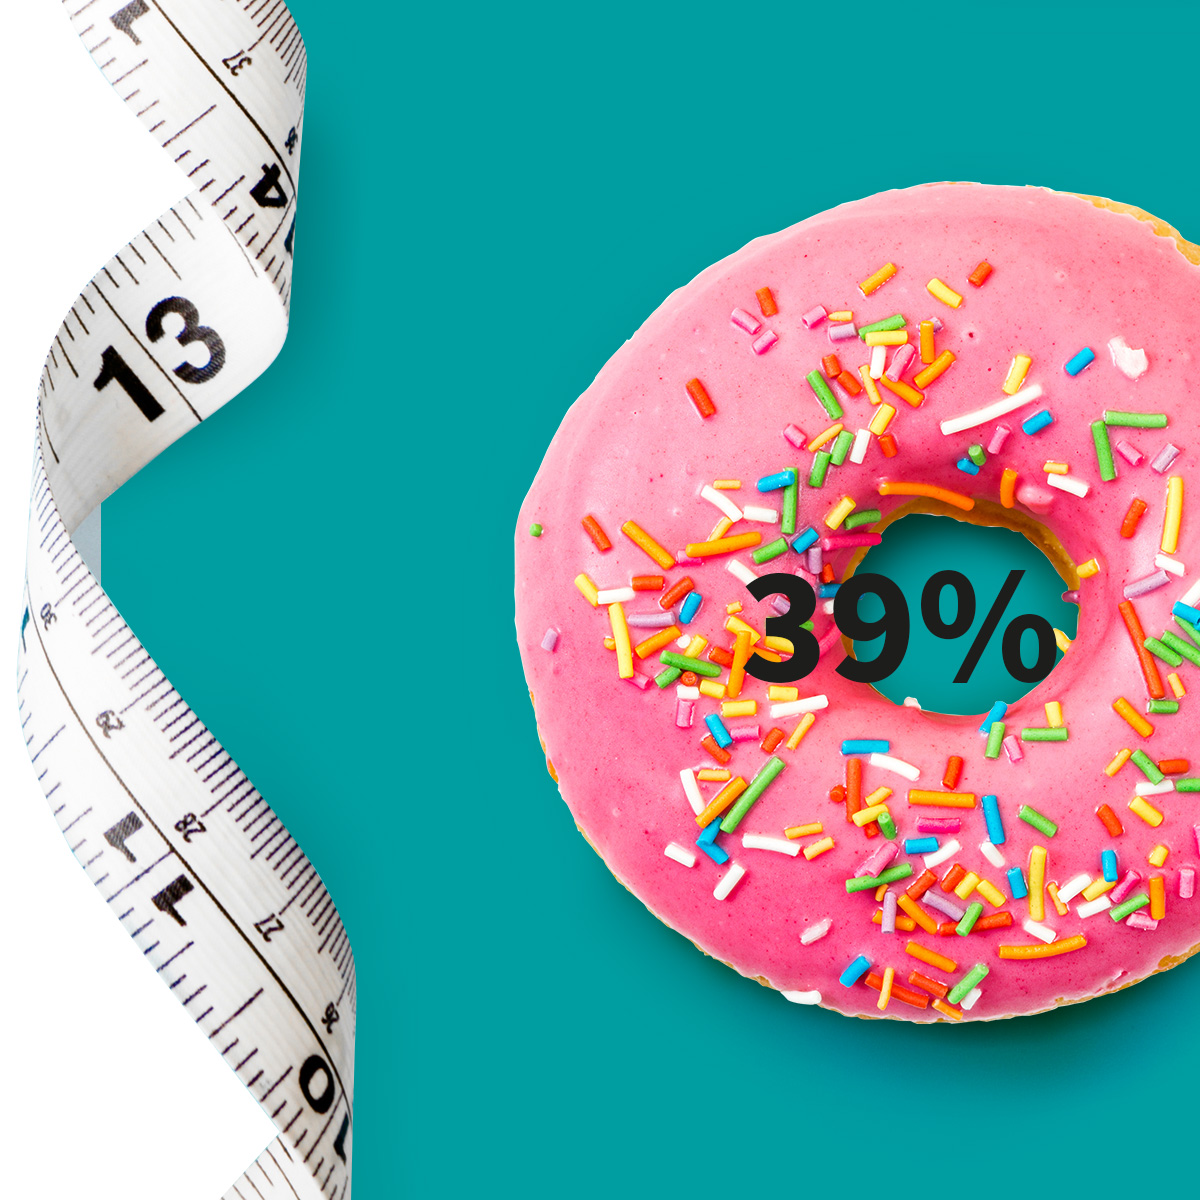 [.ZA-en South Africa (english)] •	A measuring tape and a doughnut with pink icing and colourful sugar sprinkle as a metaphor for obesity